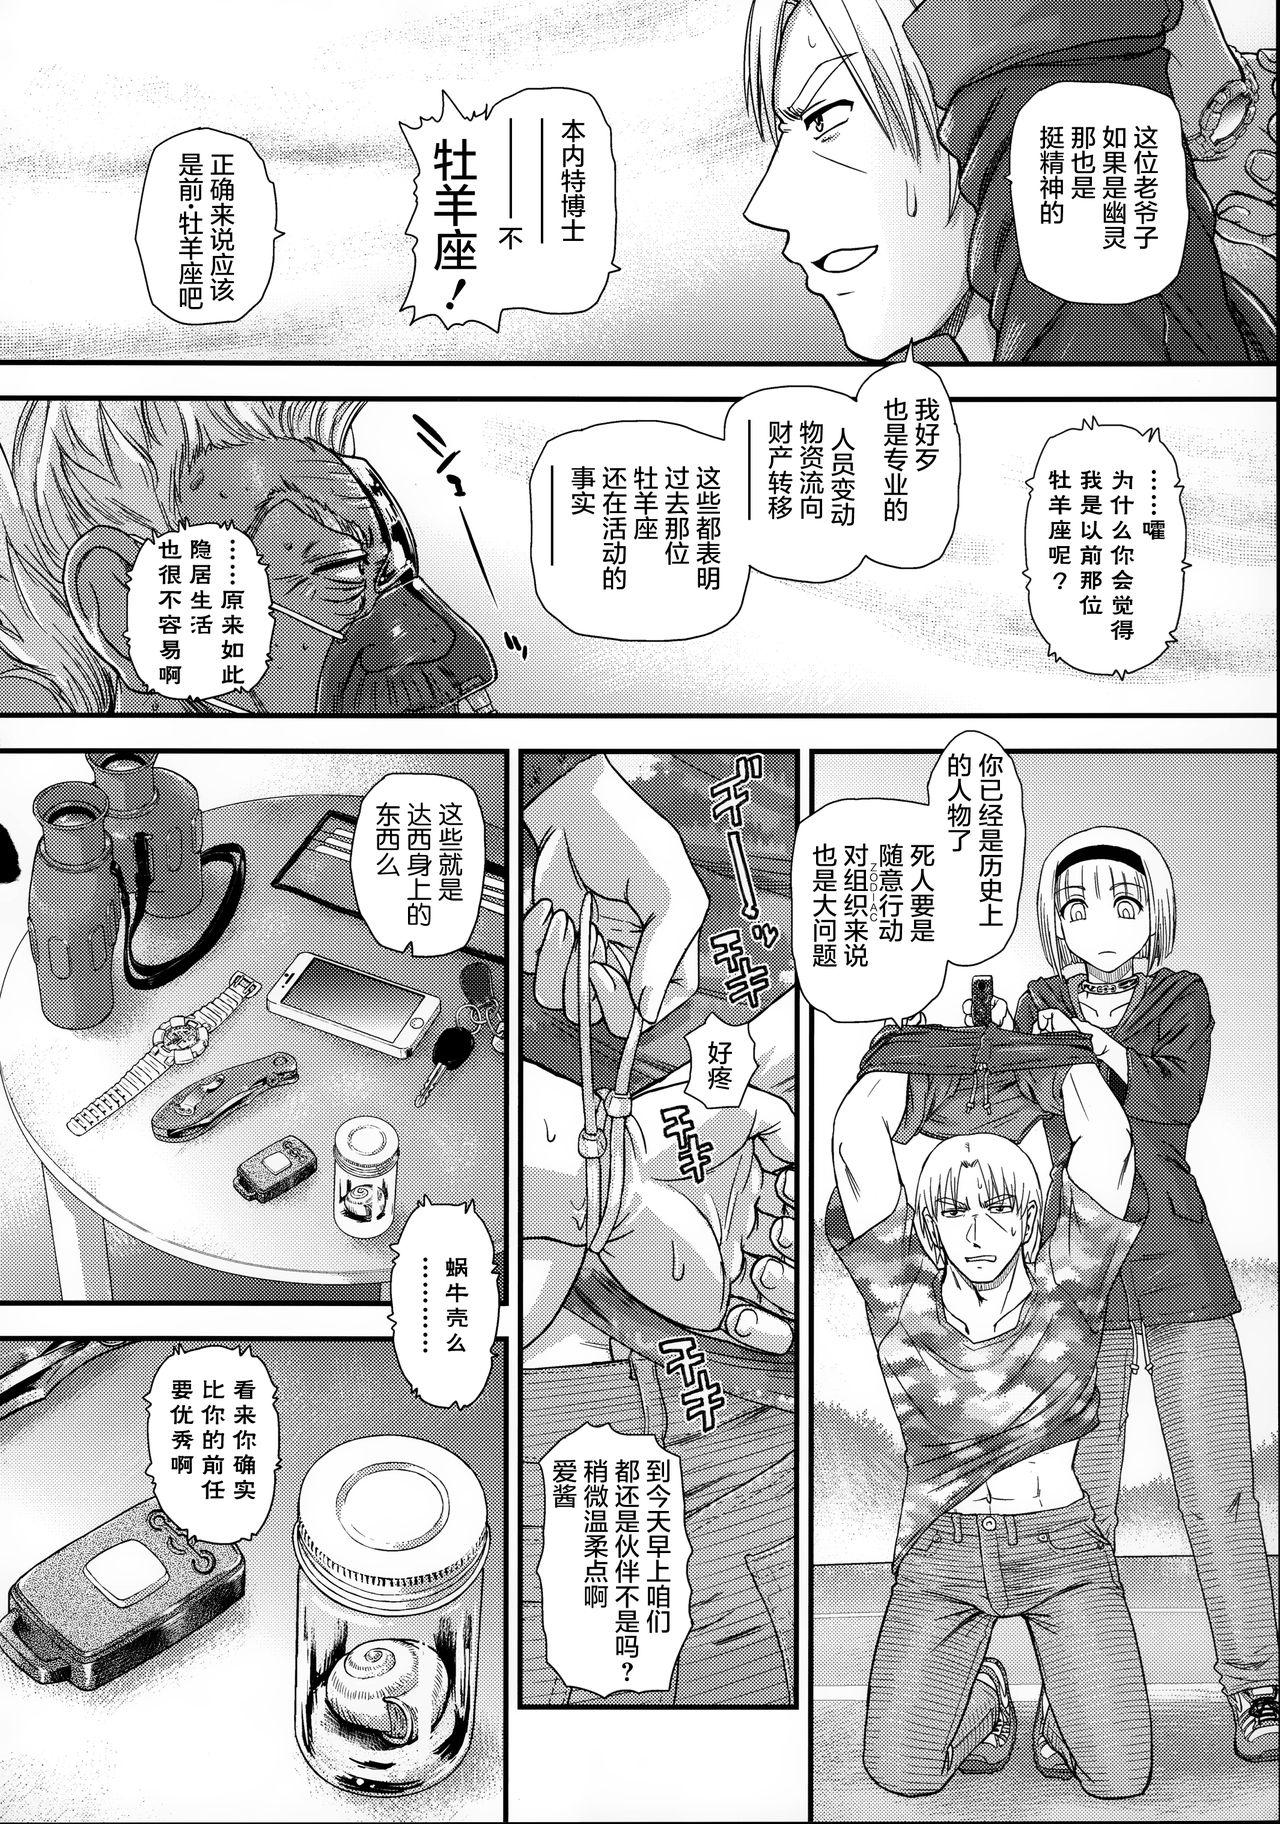 Free Fuck Clips (C95) [Behind Moon (Dulce-Q)] DR:II ep.7 ~Dulce Report~ | 达西报告II Ep.7 [Chinese] [鬼畜王汉化组] - Original Fantasy - Page 10